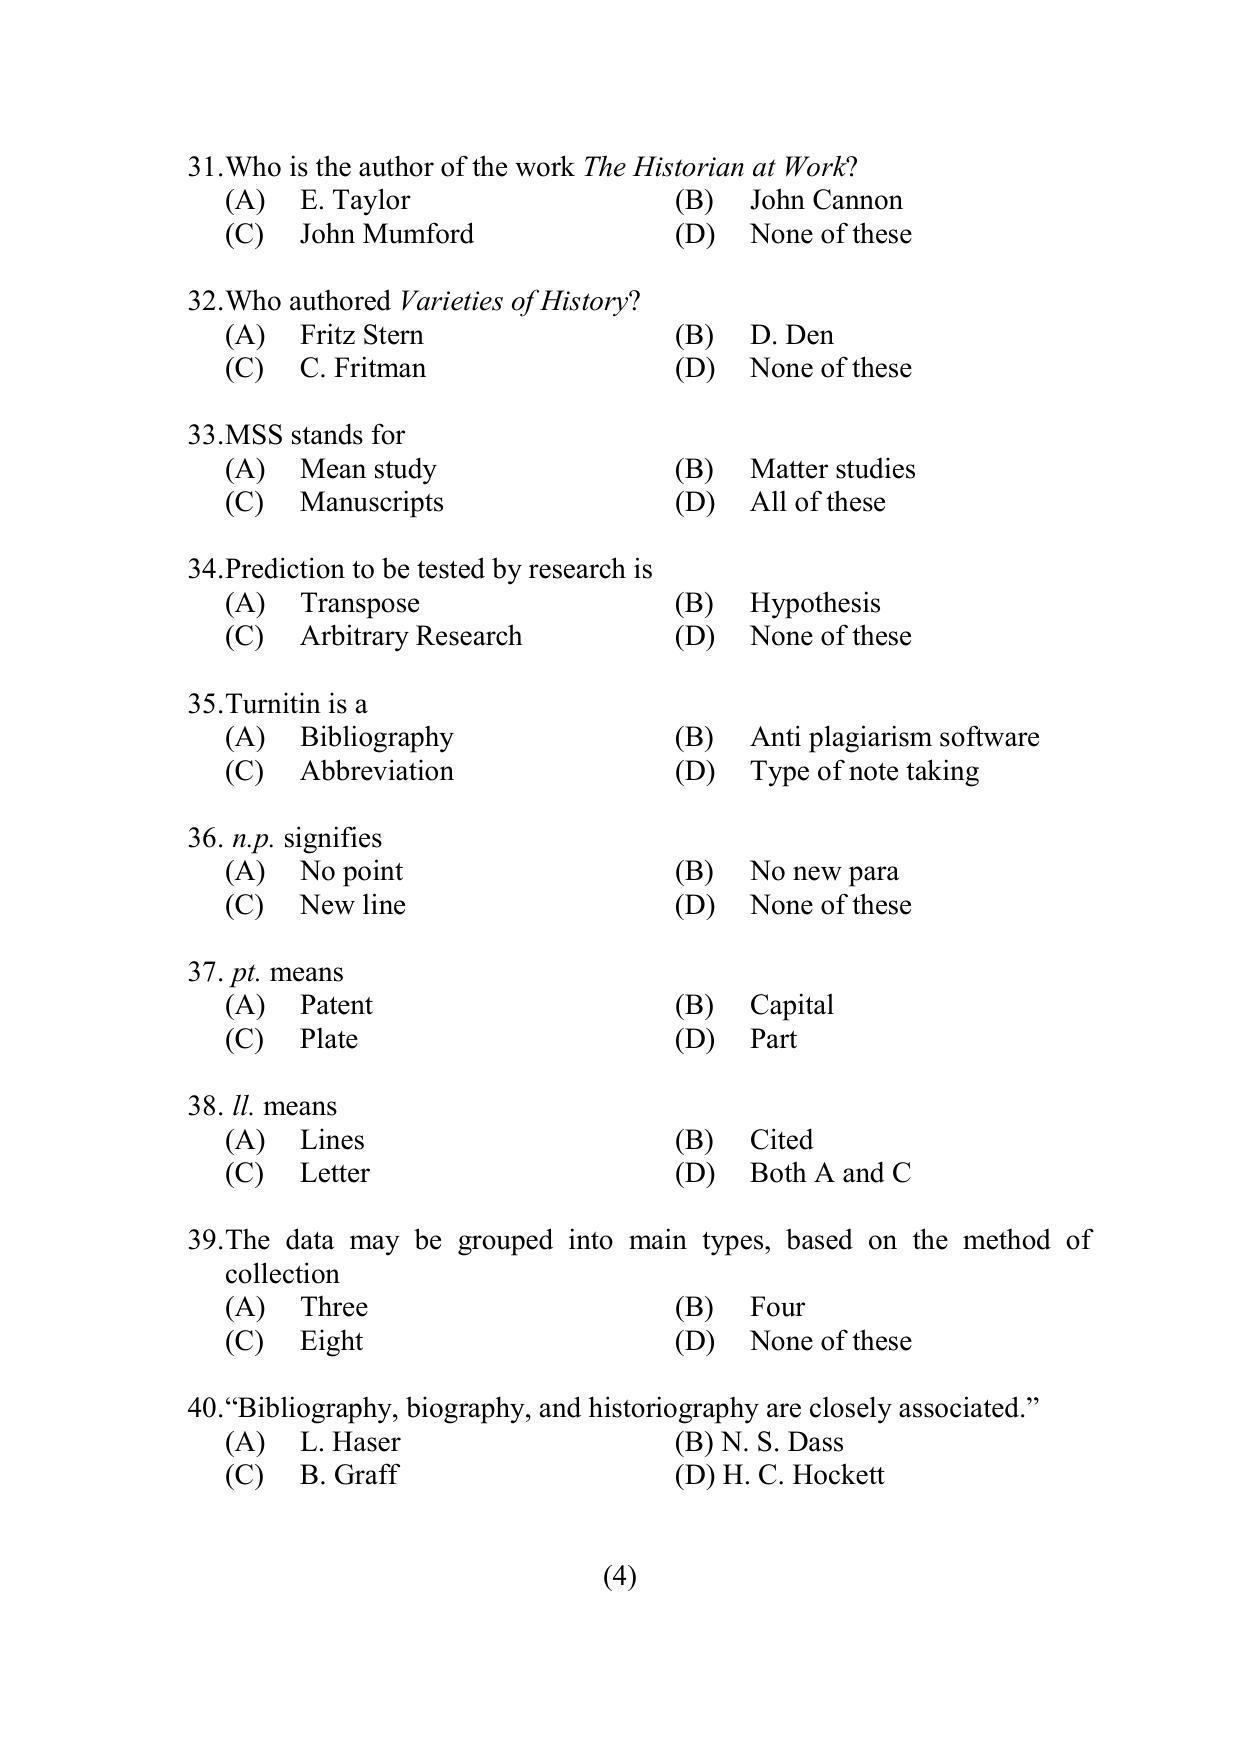 PU MPET Ancient Indian History & Archeology 2022 Question Papers - Page 4